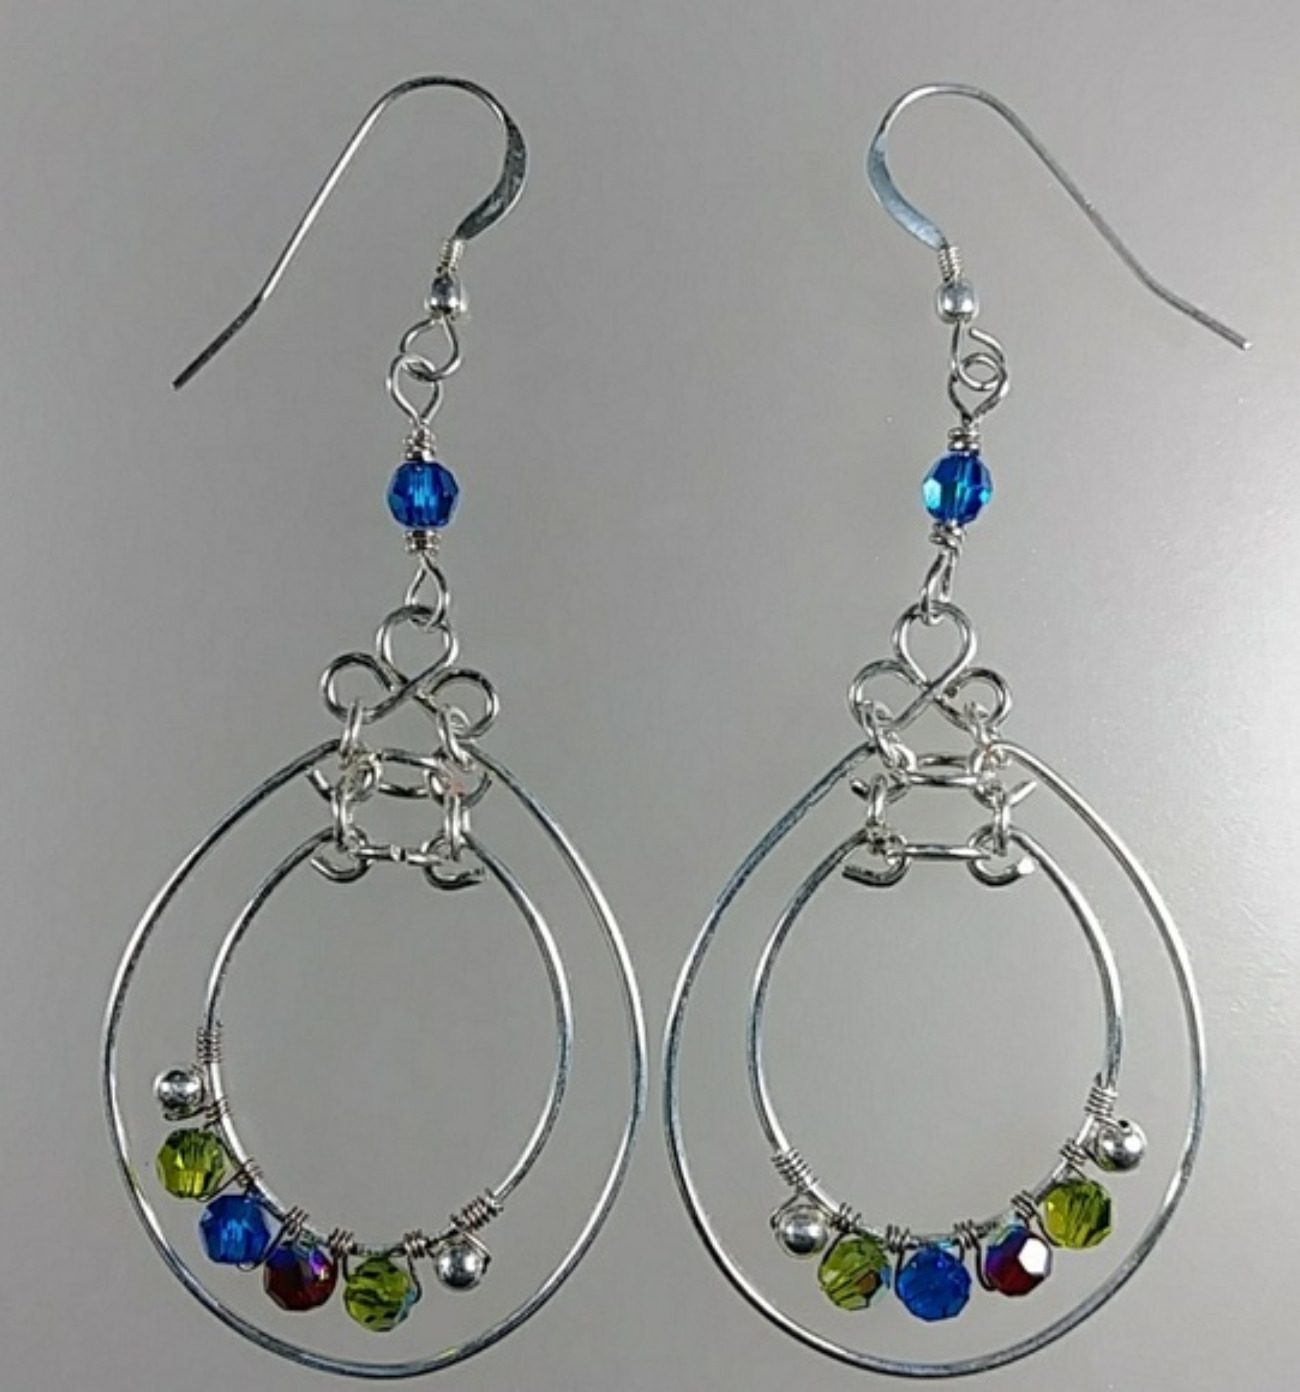 (632 - EAR) - Description:  Earrings: Sterling Silver Wire & Beads, Olivine, Sapphire, Ruby Swarovski AB Crystal Beads, Sterling Silver Fishhook Earwire. - Dimension:  (3”L) x (1 1/4” W) (inches/Length/Width)